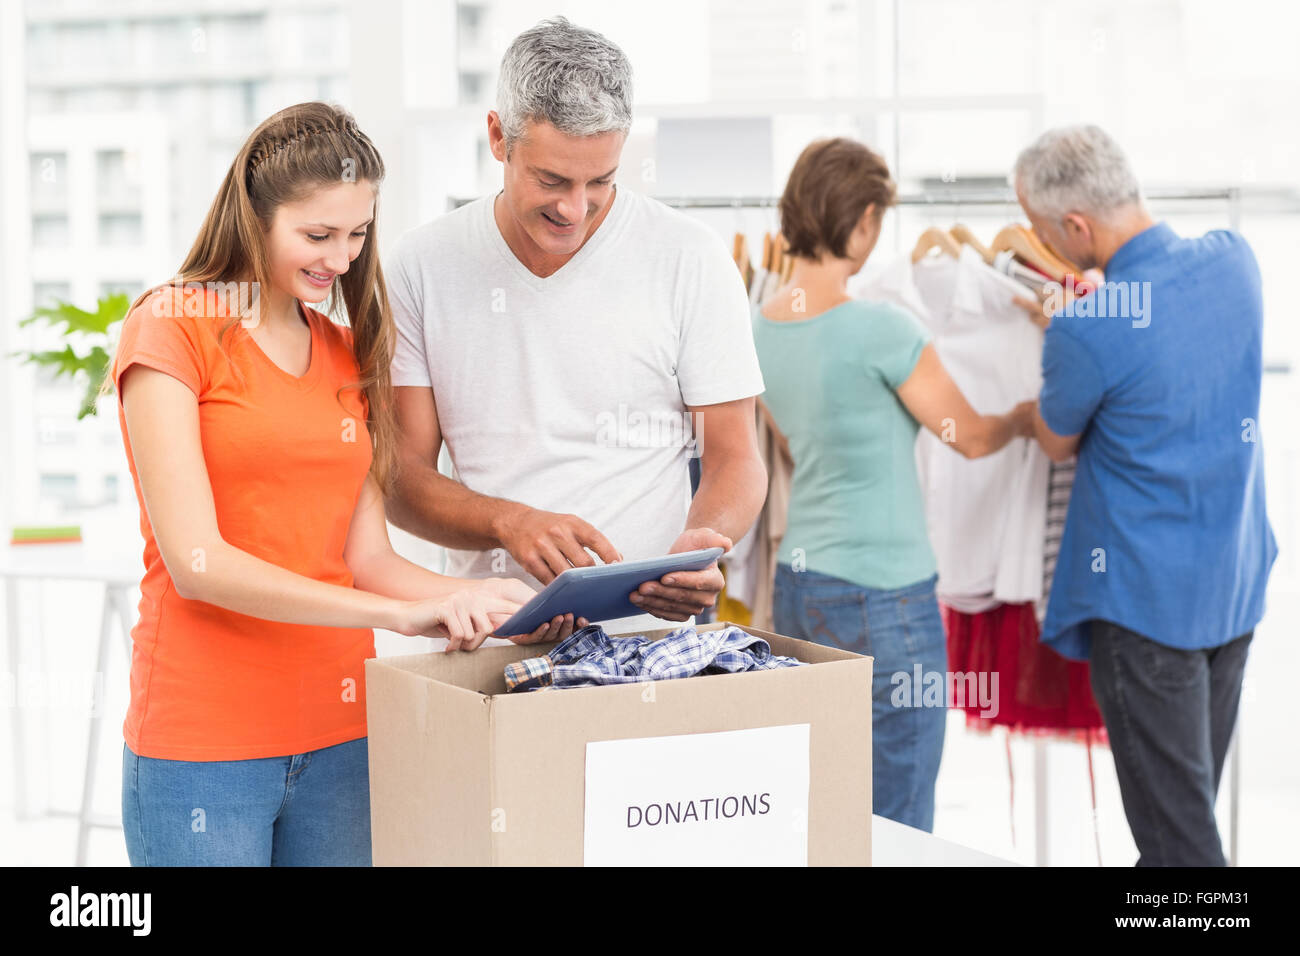 Smiling casual business people sorting donations Stock Photo